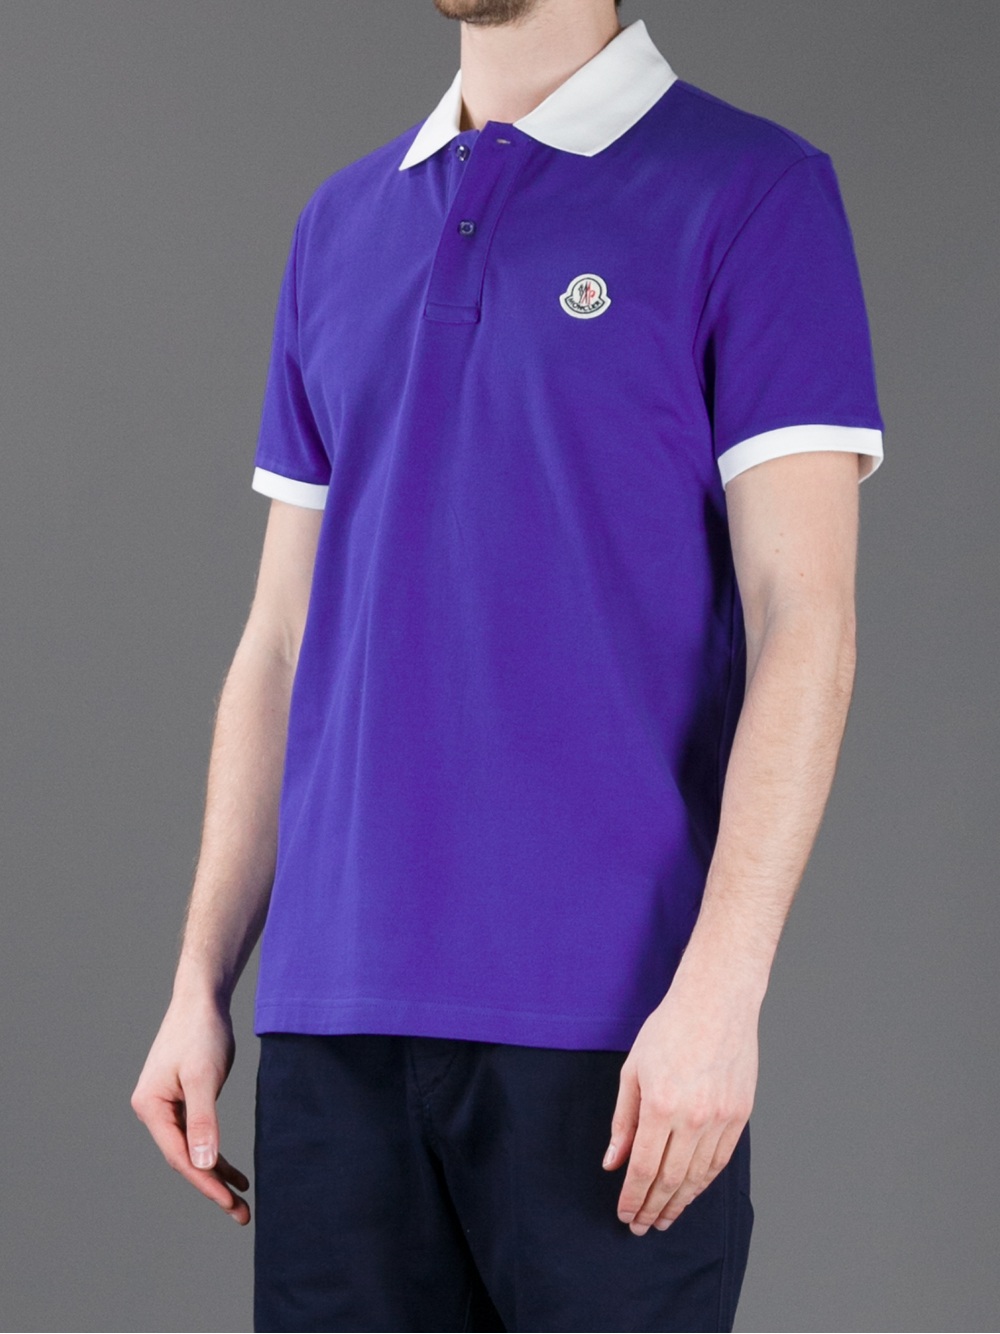 Moncler Contrast Collar Polo Shirt in Purple for Men - Lyst